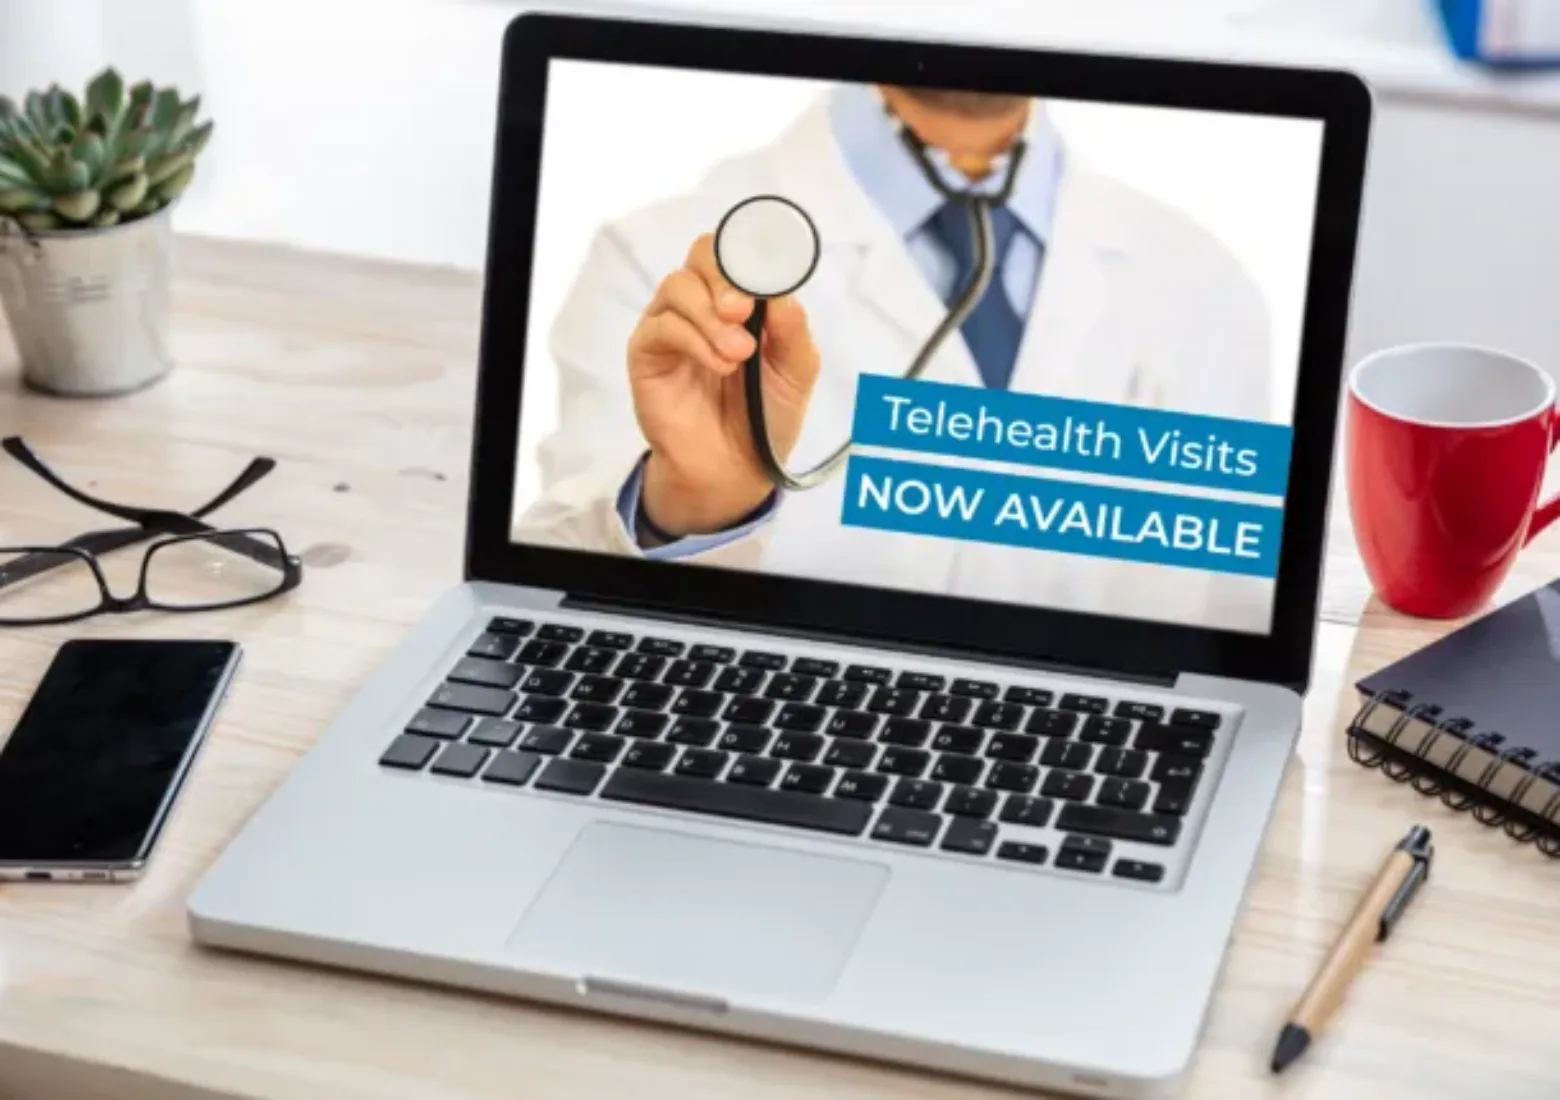 ELFP-Offers-Telehealth-Visits-During-the-COVID-19-Pandemic